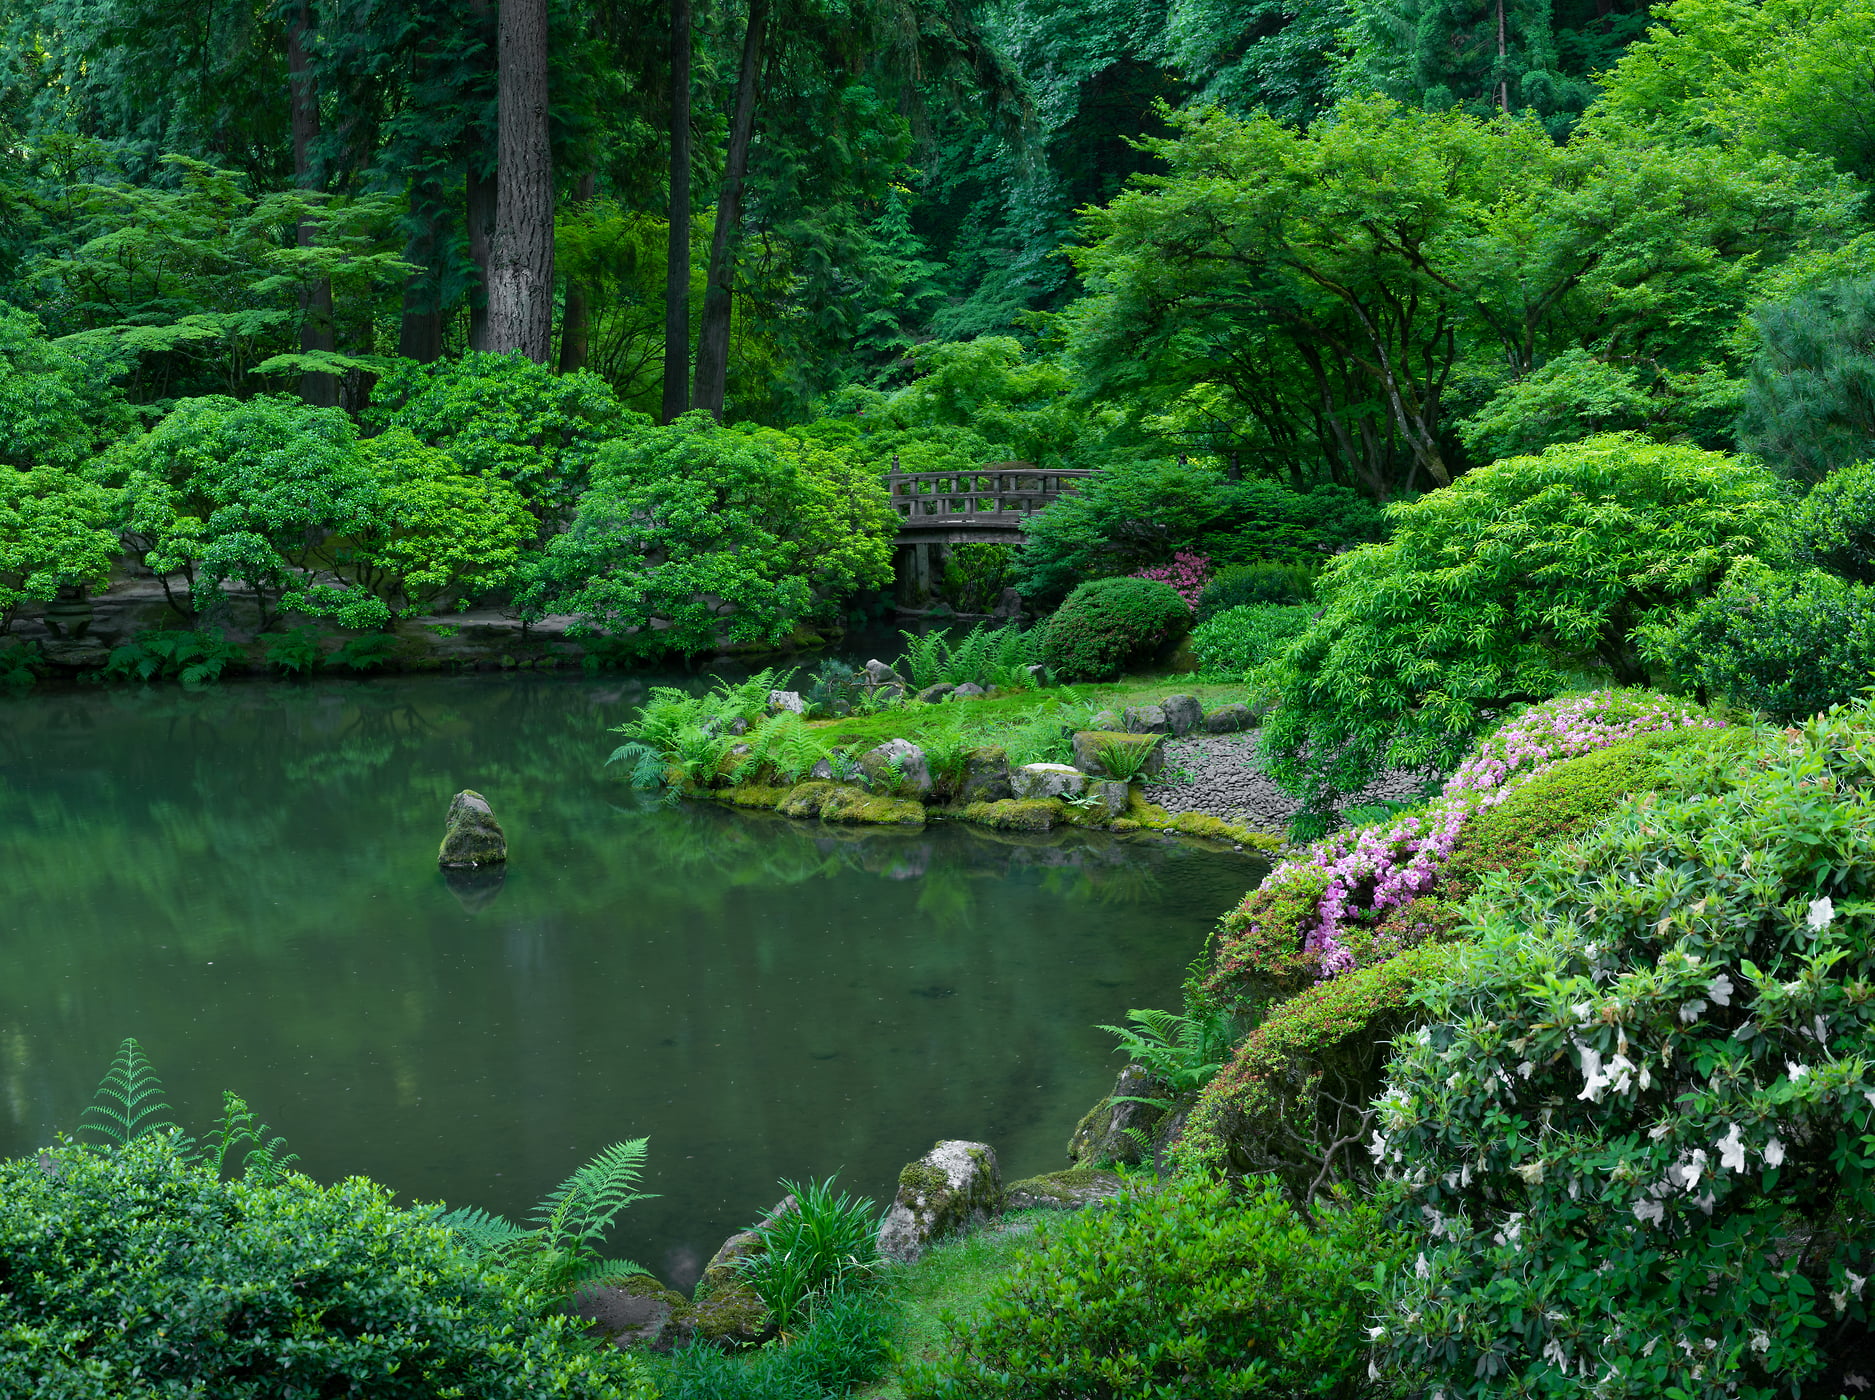 208 megapixels! A very high resolution, large-format VAST photo print of a garden pond with a bridge and forest; photograph created by Greg Probst in Portland Japanese Garden